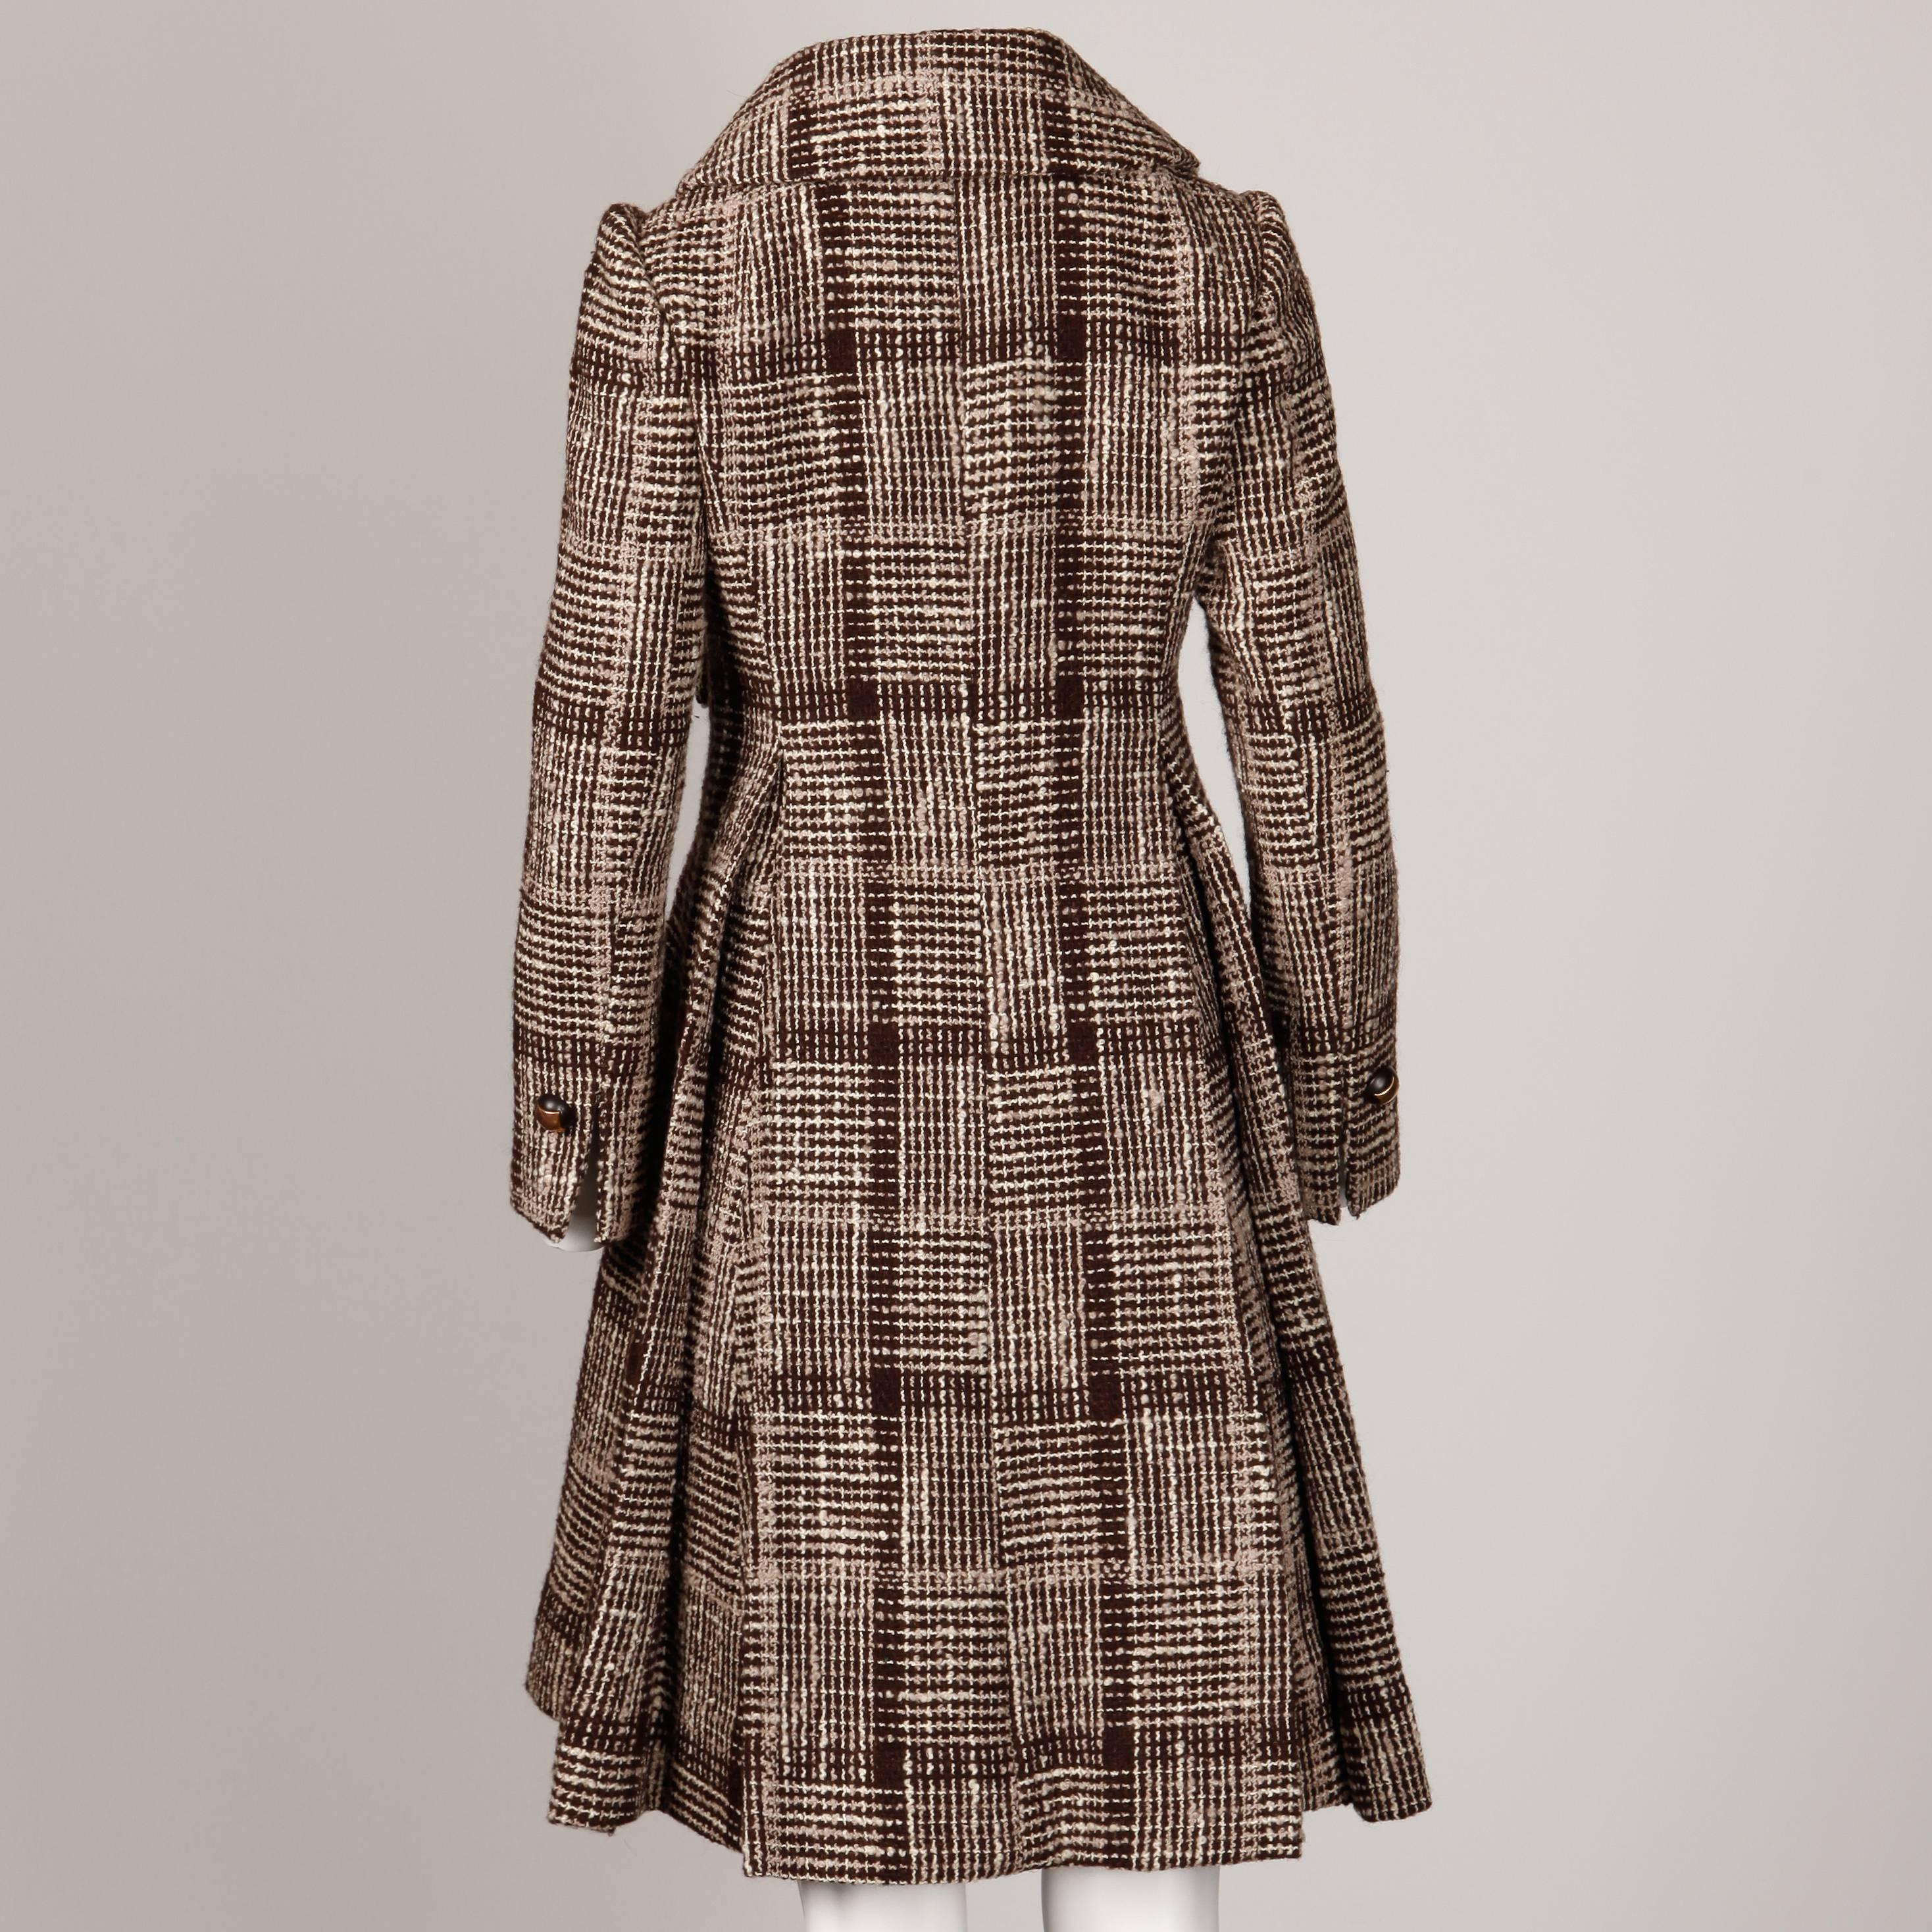 Brown 1960s Cardinali Vintage Wool Tweed Princess Coat with Box Pleats + Brass Buttons